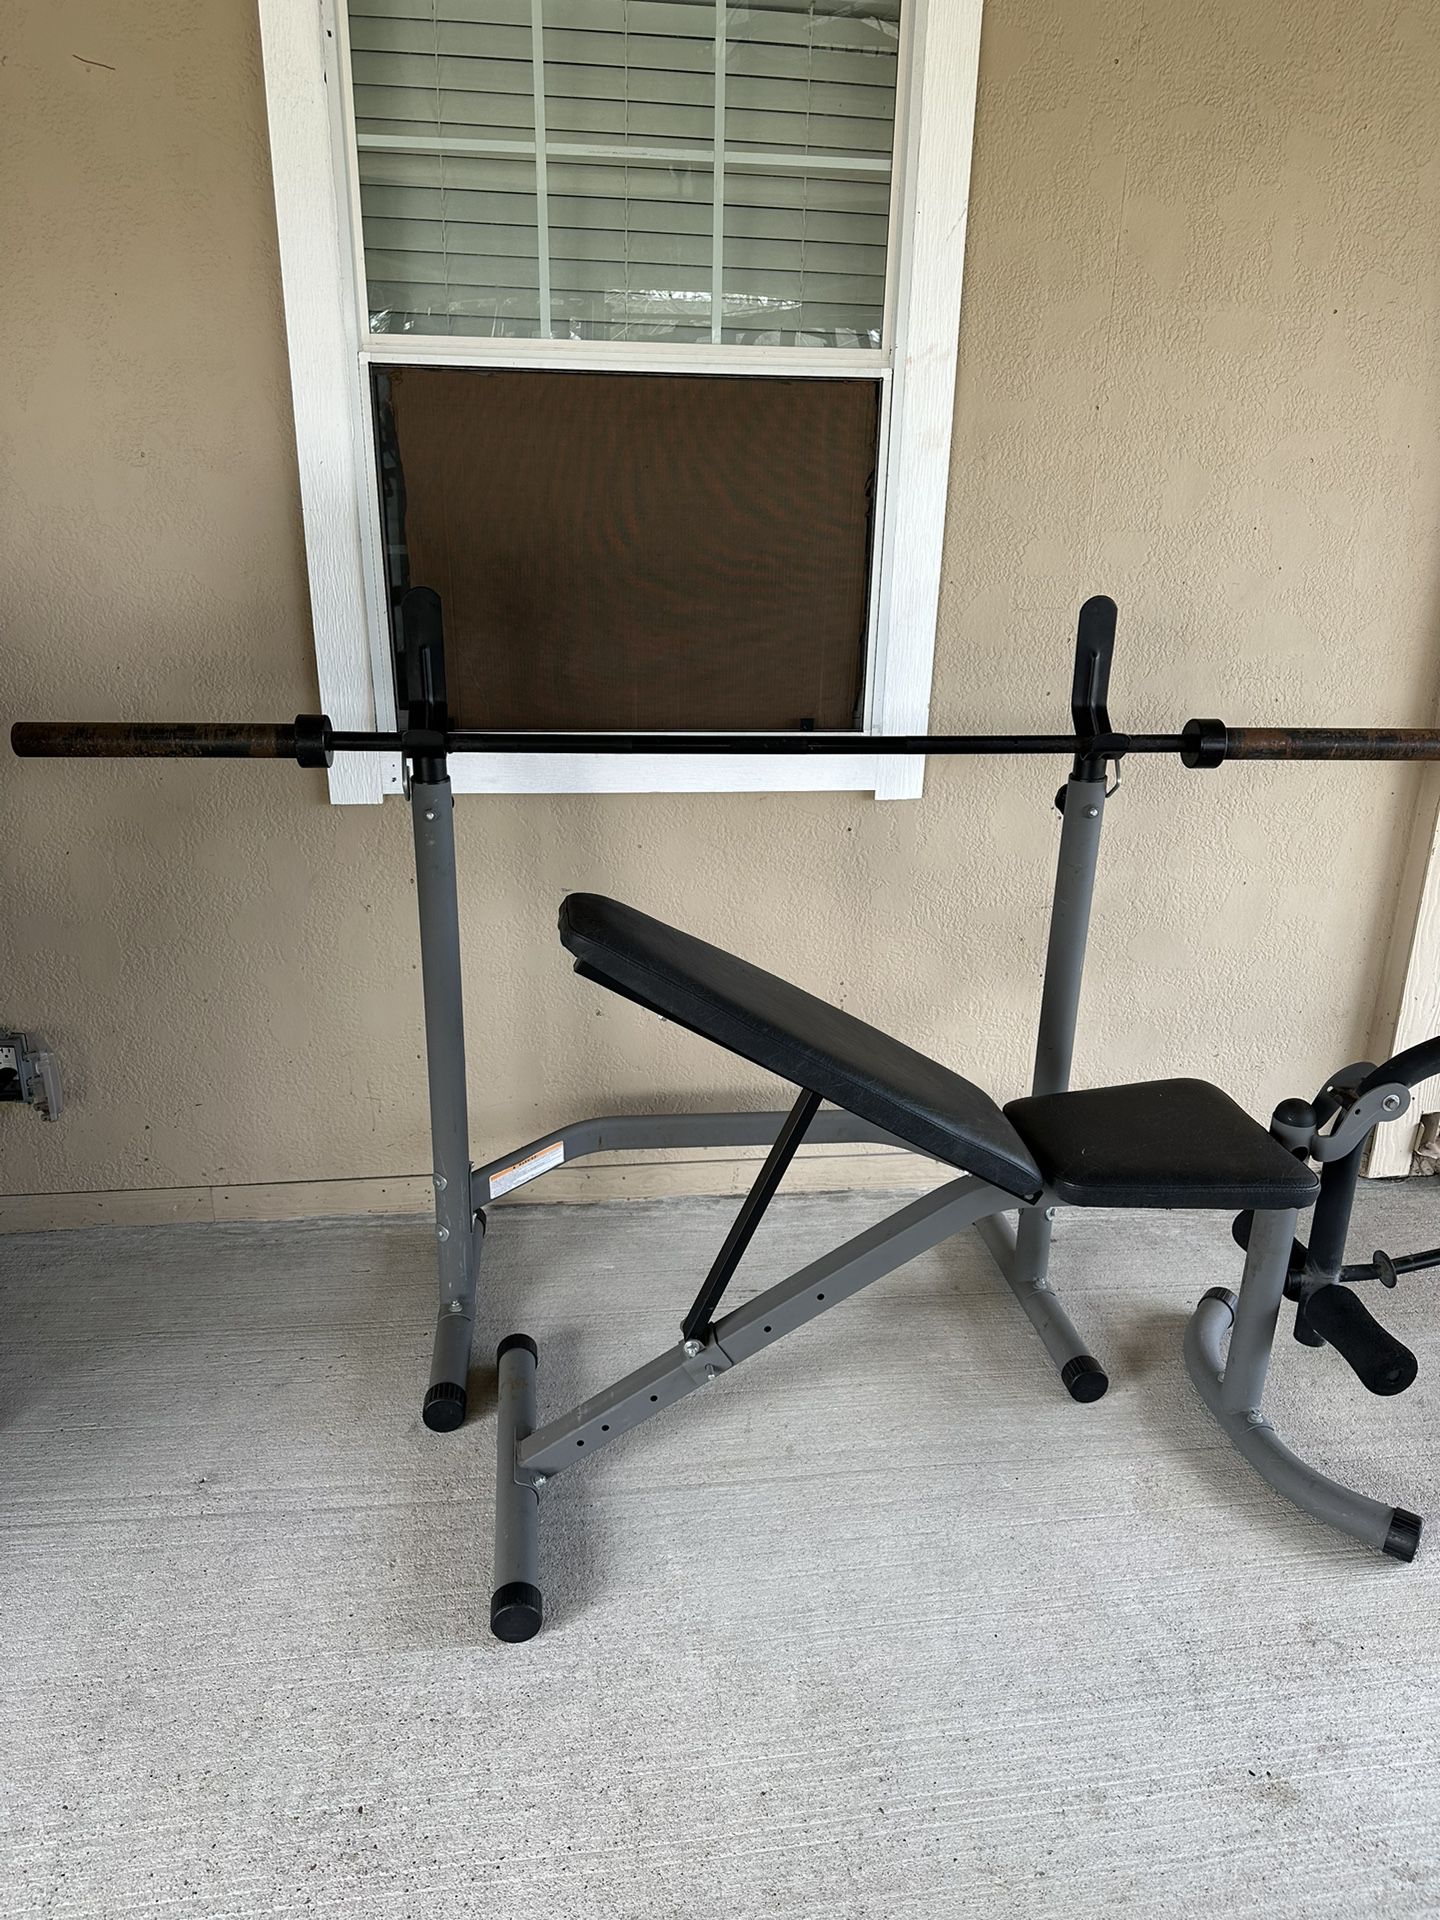 Body Champ adjustable Weight Bench with Leg Extension Attachment & cap 45Lb Olympic Barbell 7ft $170